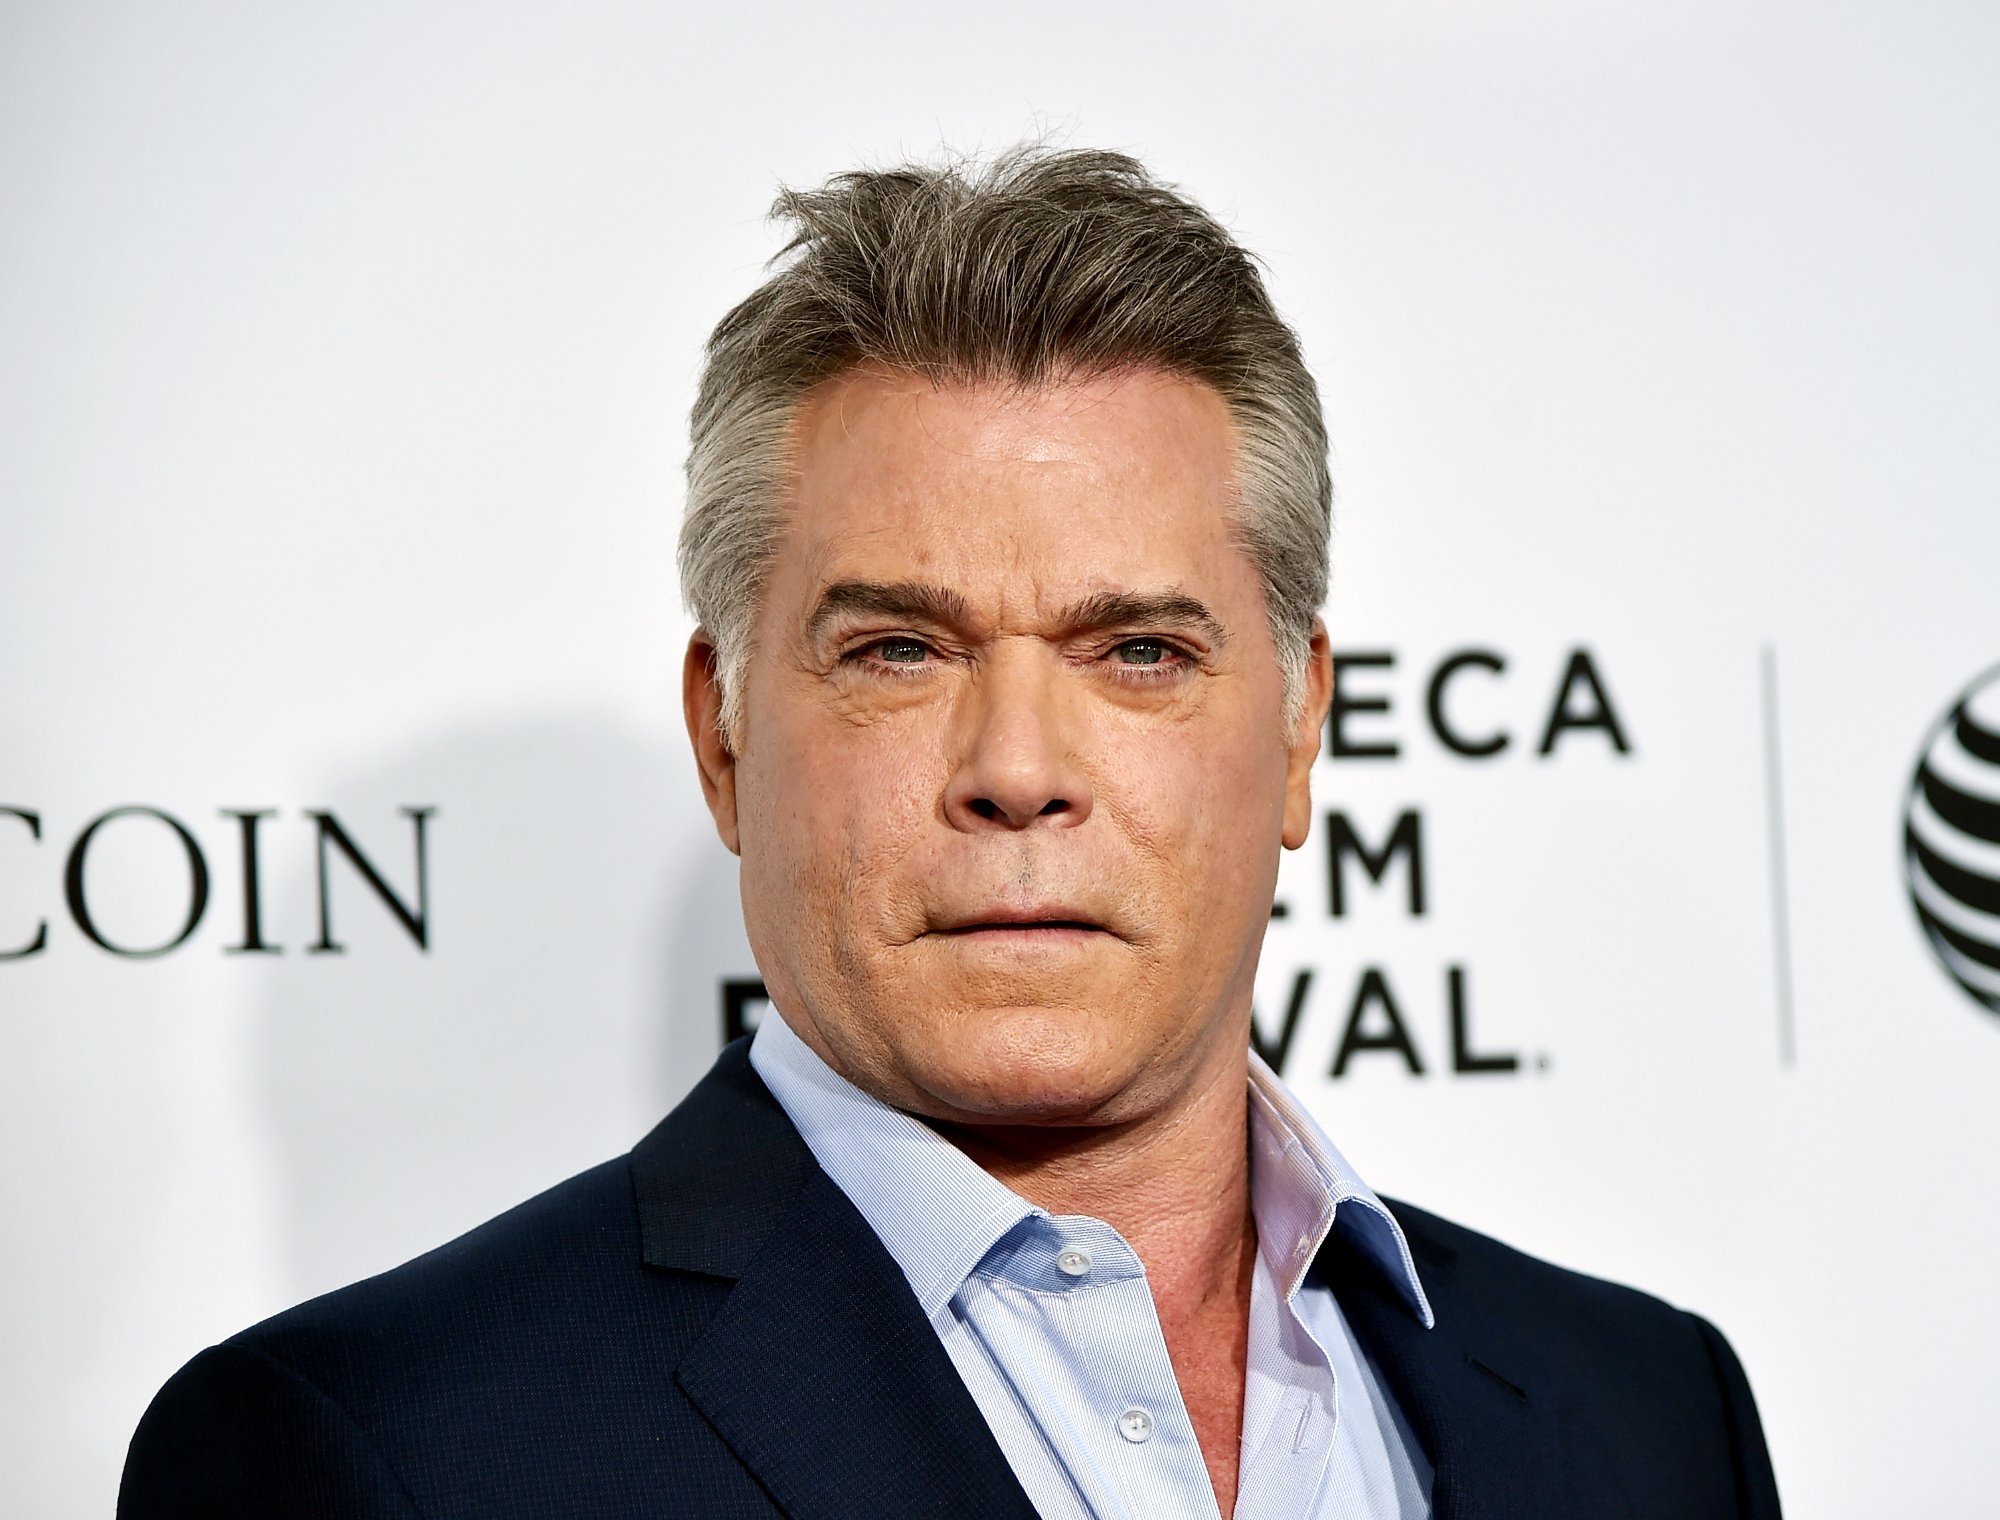 'Goodfellas' actor Ray Liotta wearing a suit with a straight face in front of a Tribeca Film Festival step and repeat